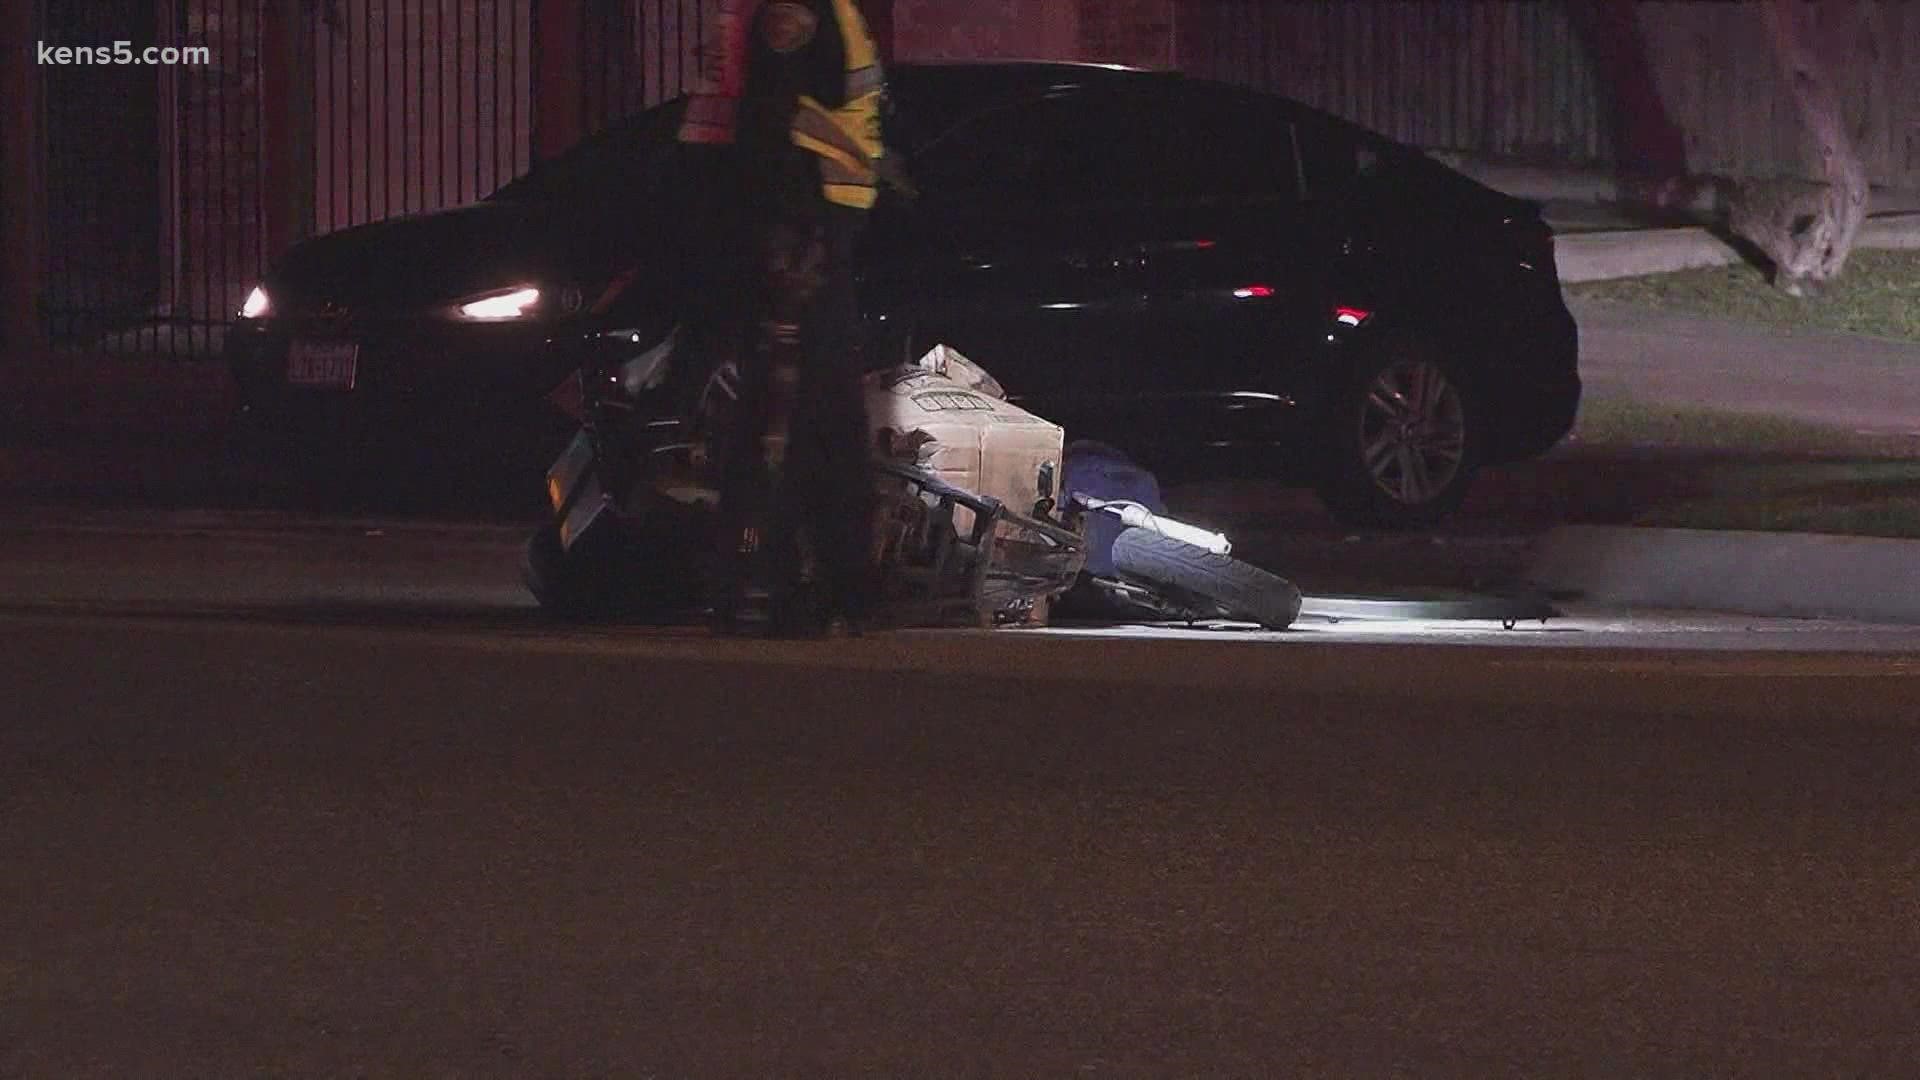 The motorcyclist was reportedly wearing a helmet, but police said he still sustained severe trauma.